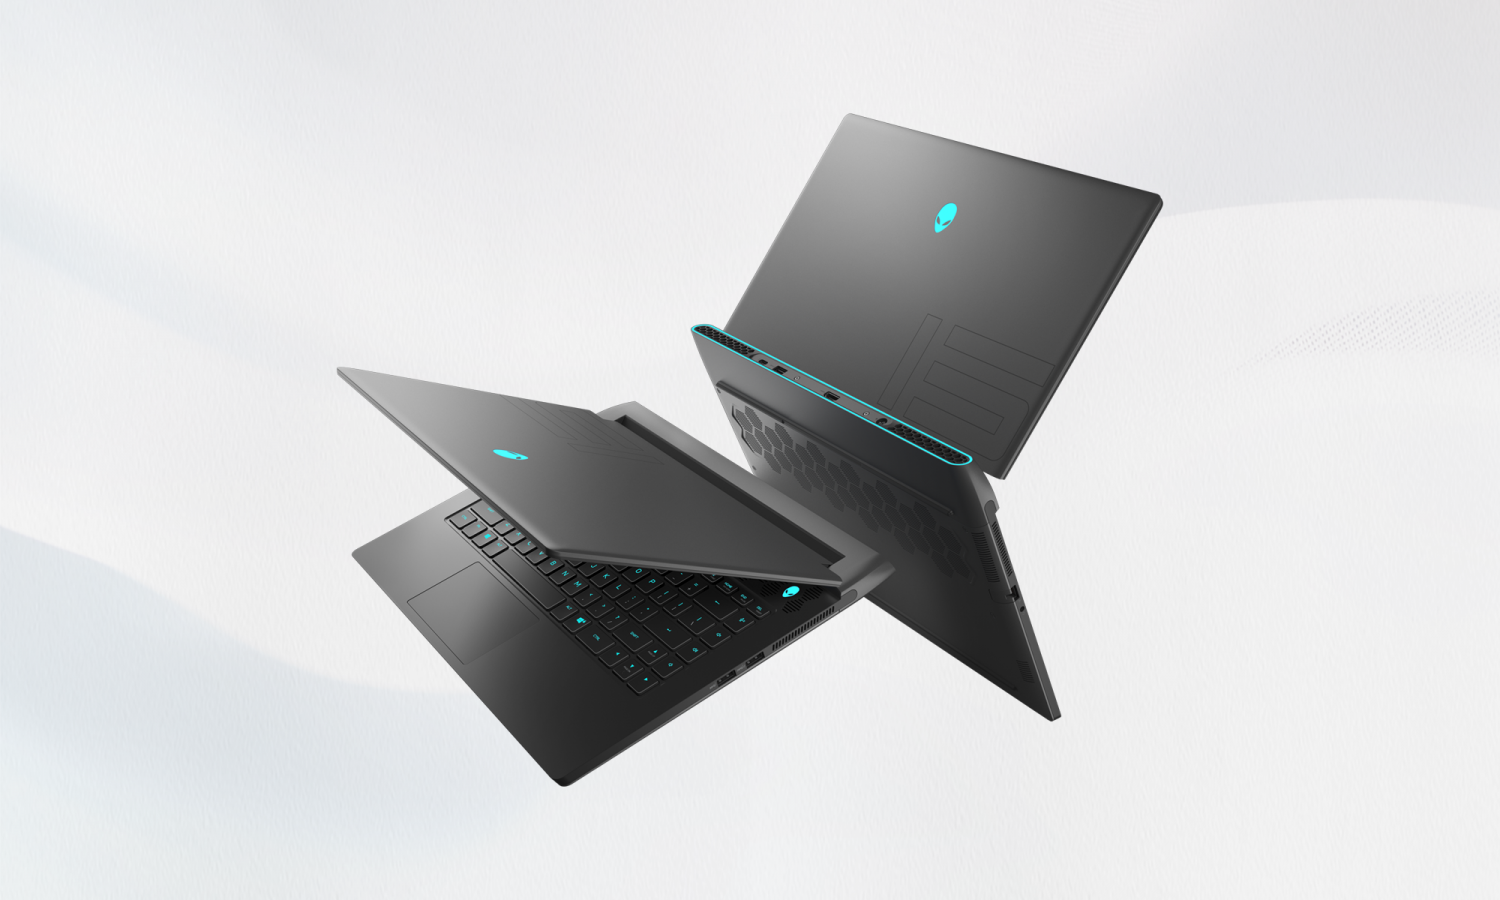 The Upcoming Alienware m15 Ryzen Edition R5